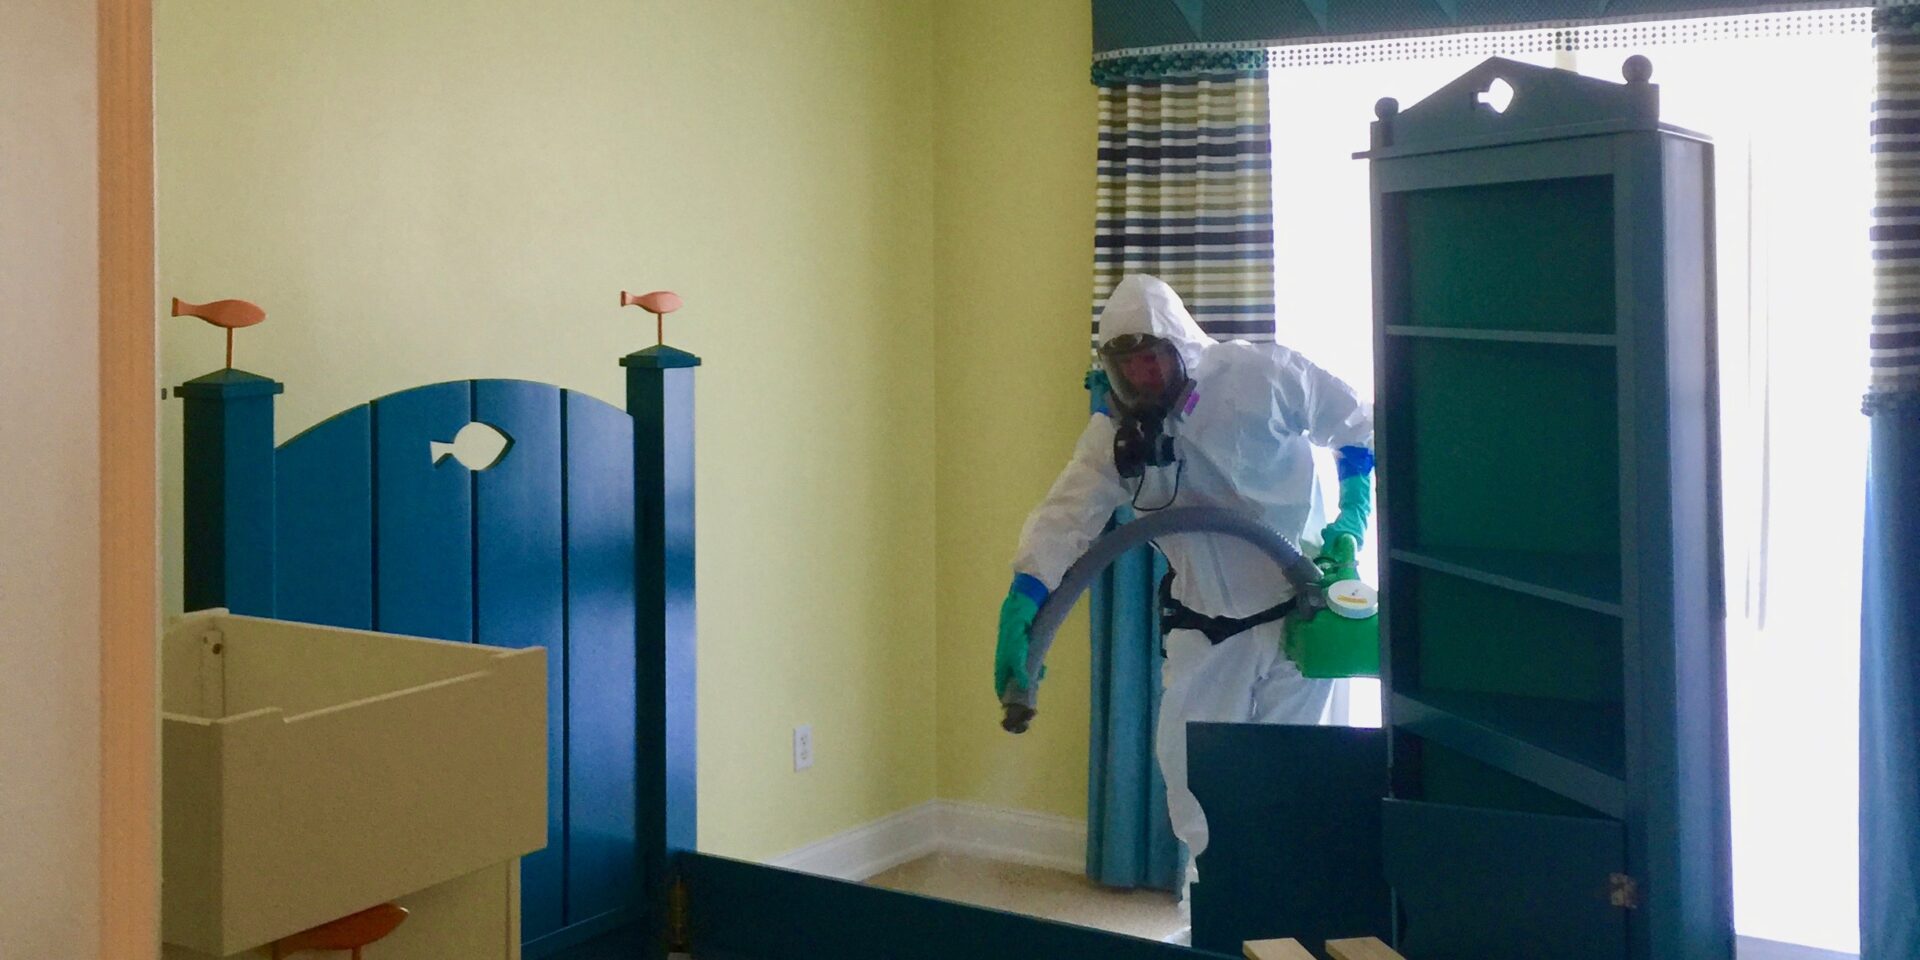 A man in white suit and green gloves cleaning.